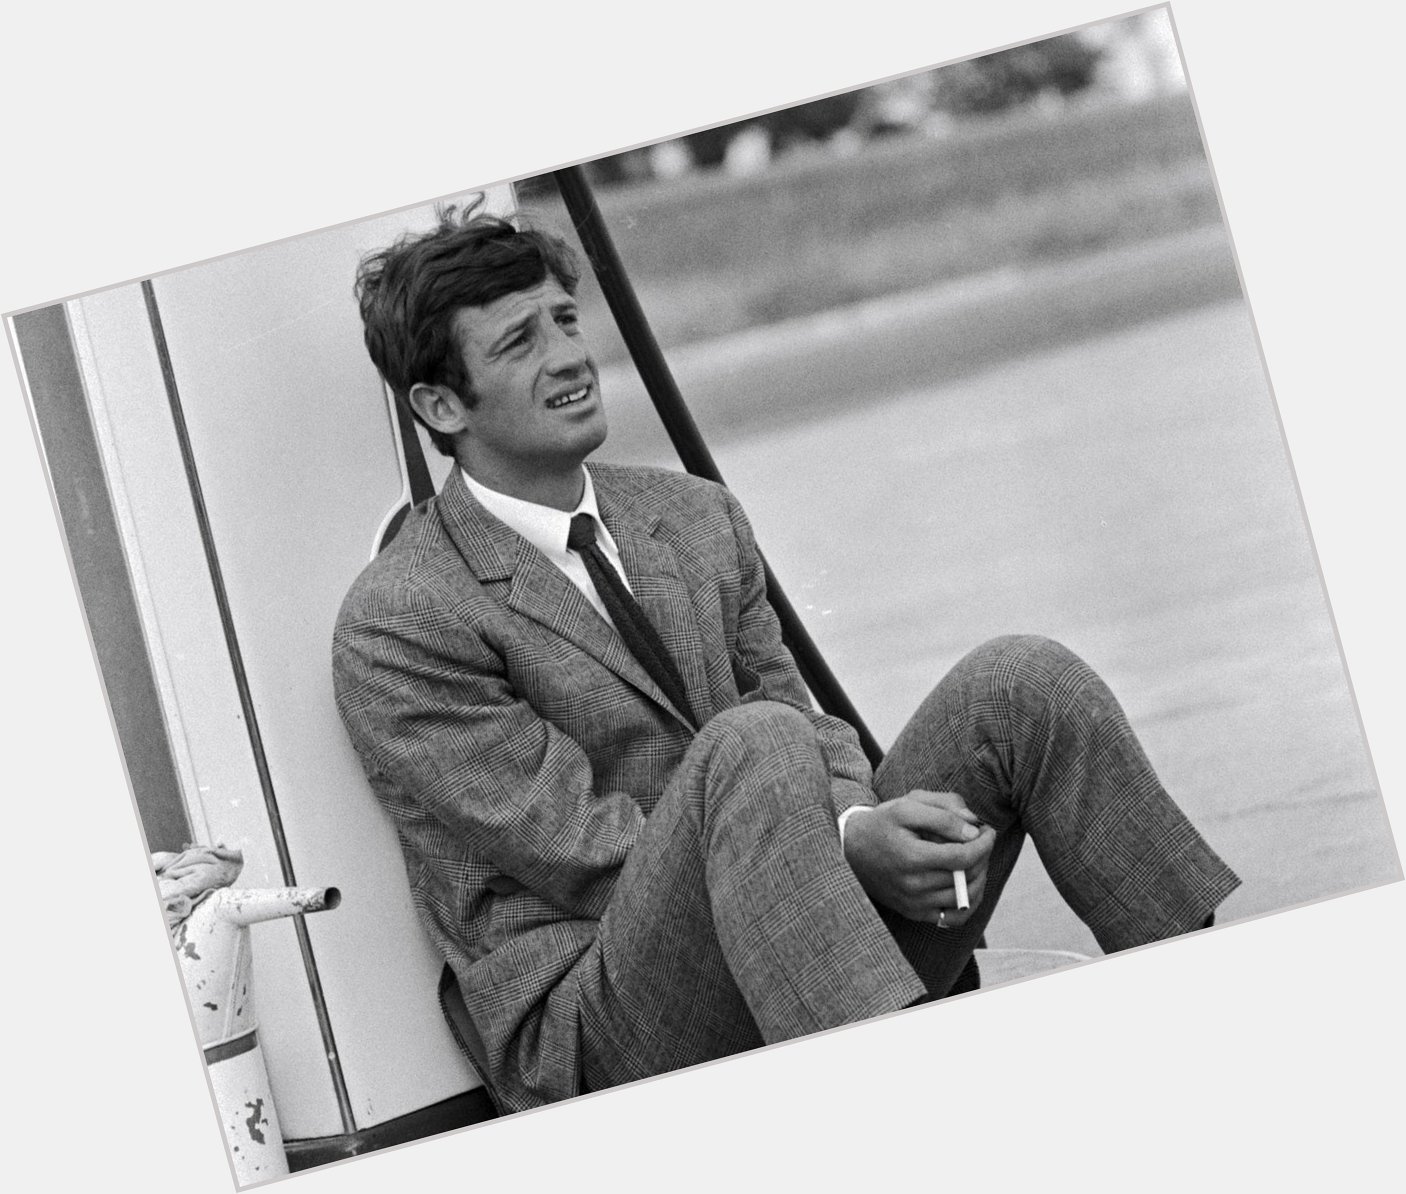 Happy Birthday Jean-Paul Belmondo - a cinematic legend if ever there was one - the Godfather of Nouvelle Vague 